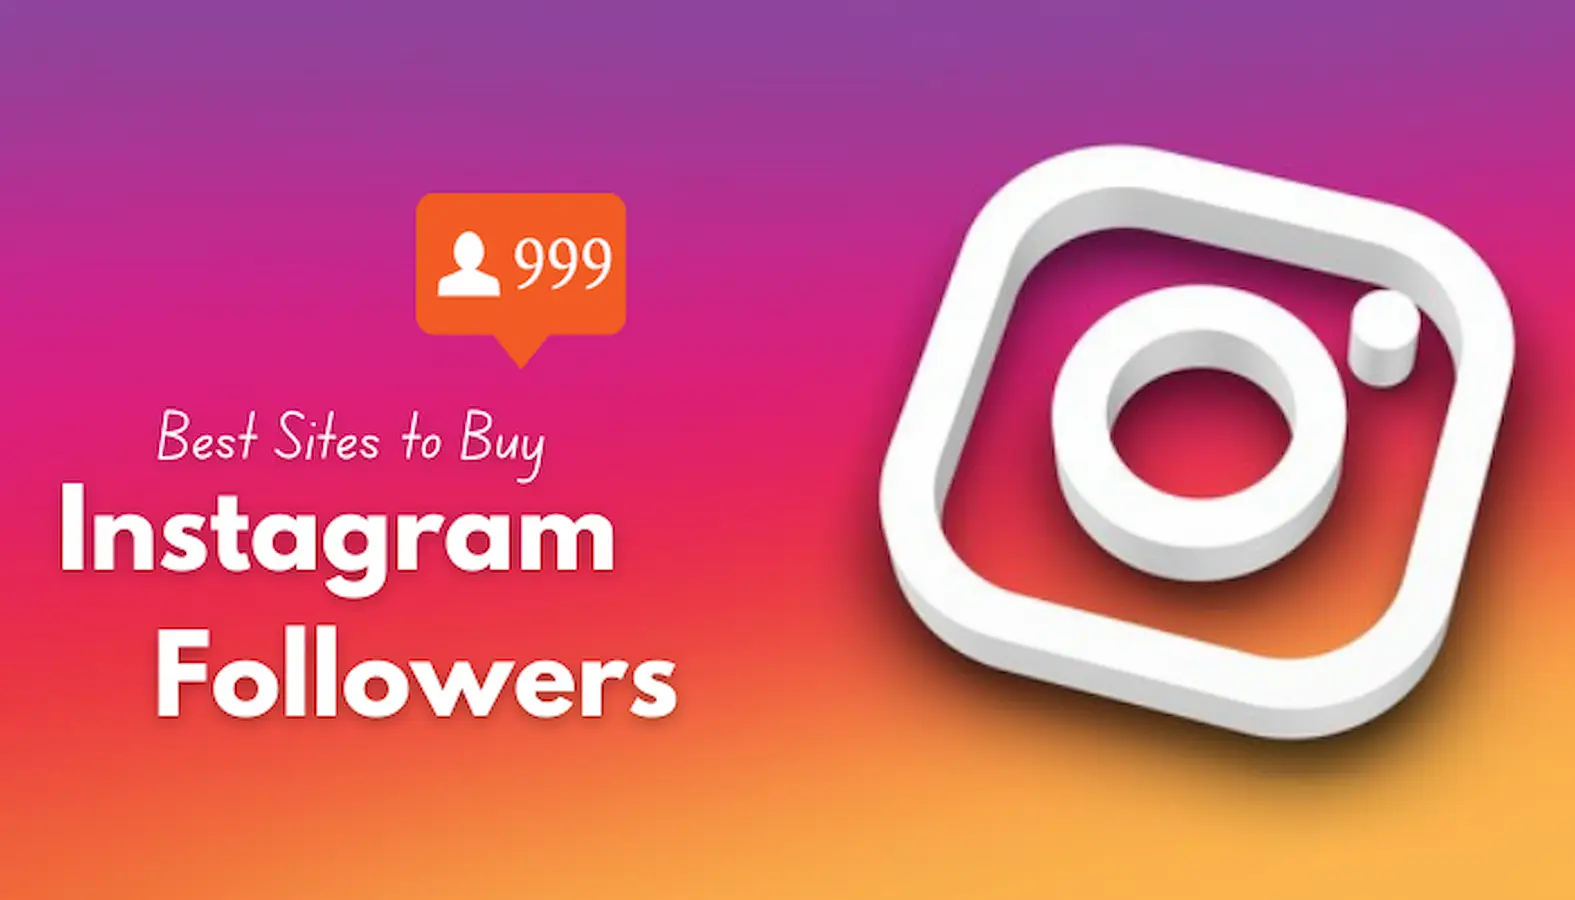 Why do You Need High Quality Instagram Followers?